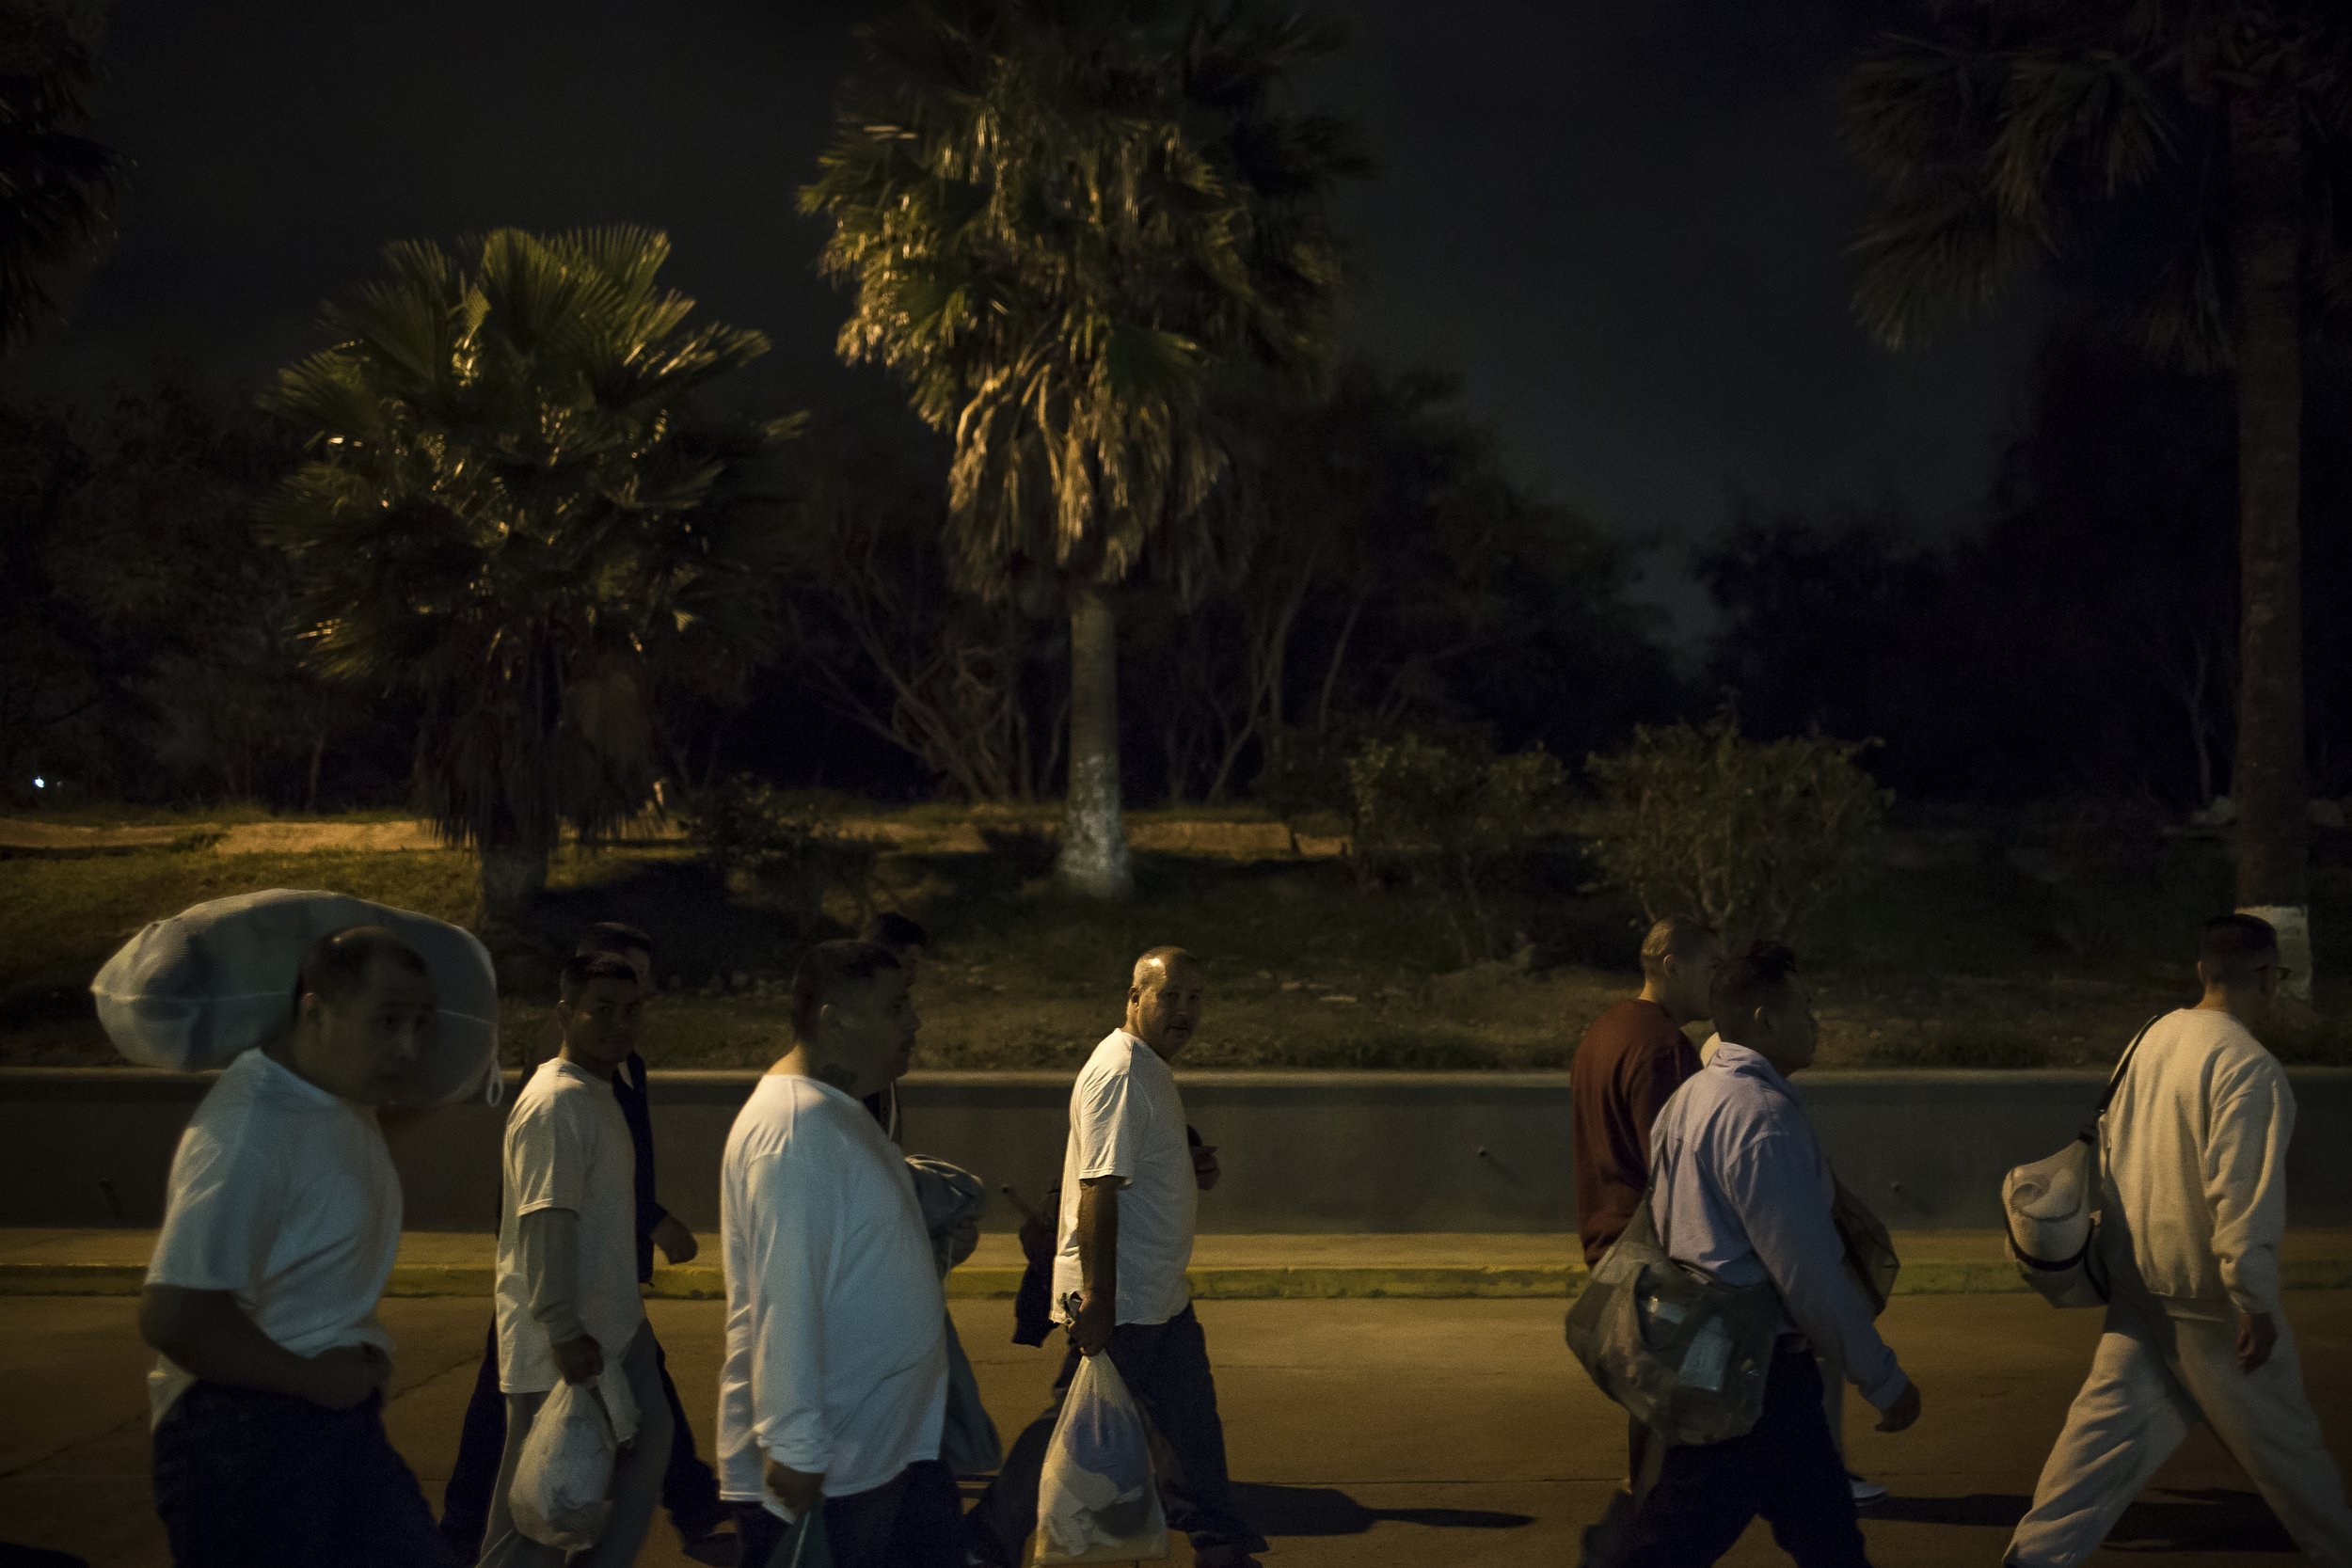  A group of undocumented Mexican national ex-offenders enter Mexico at the US-Mexico border crossing at Brownsville/Matamoros after being deported from the United States on Nov. 4, 2015. Photo by Martin do Nascimento 